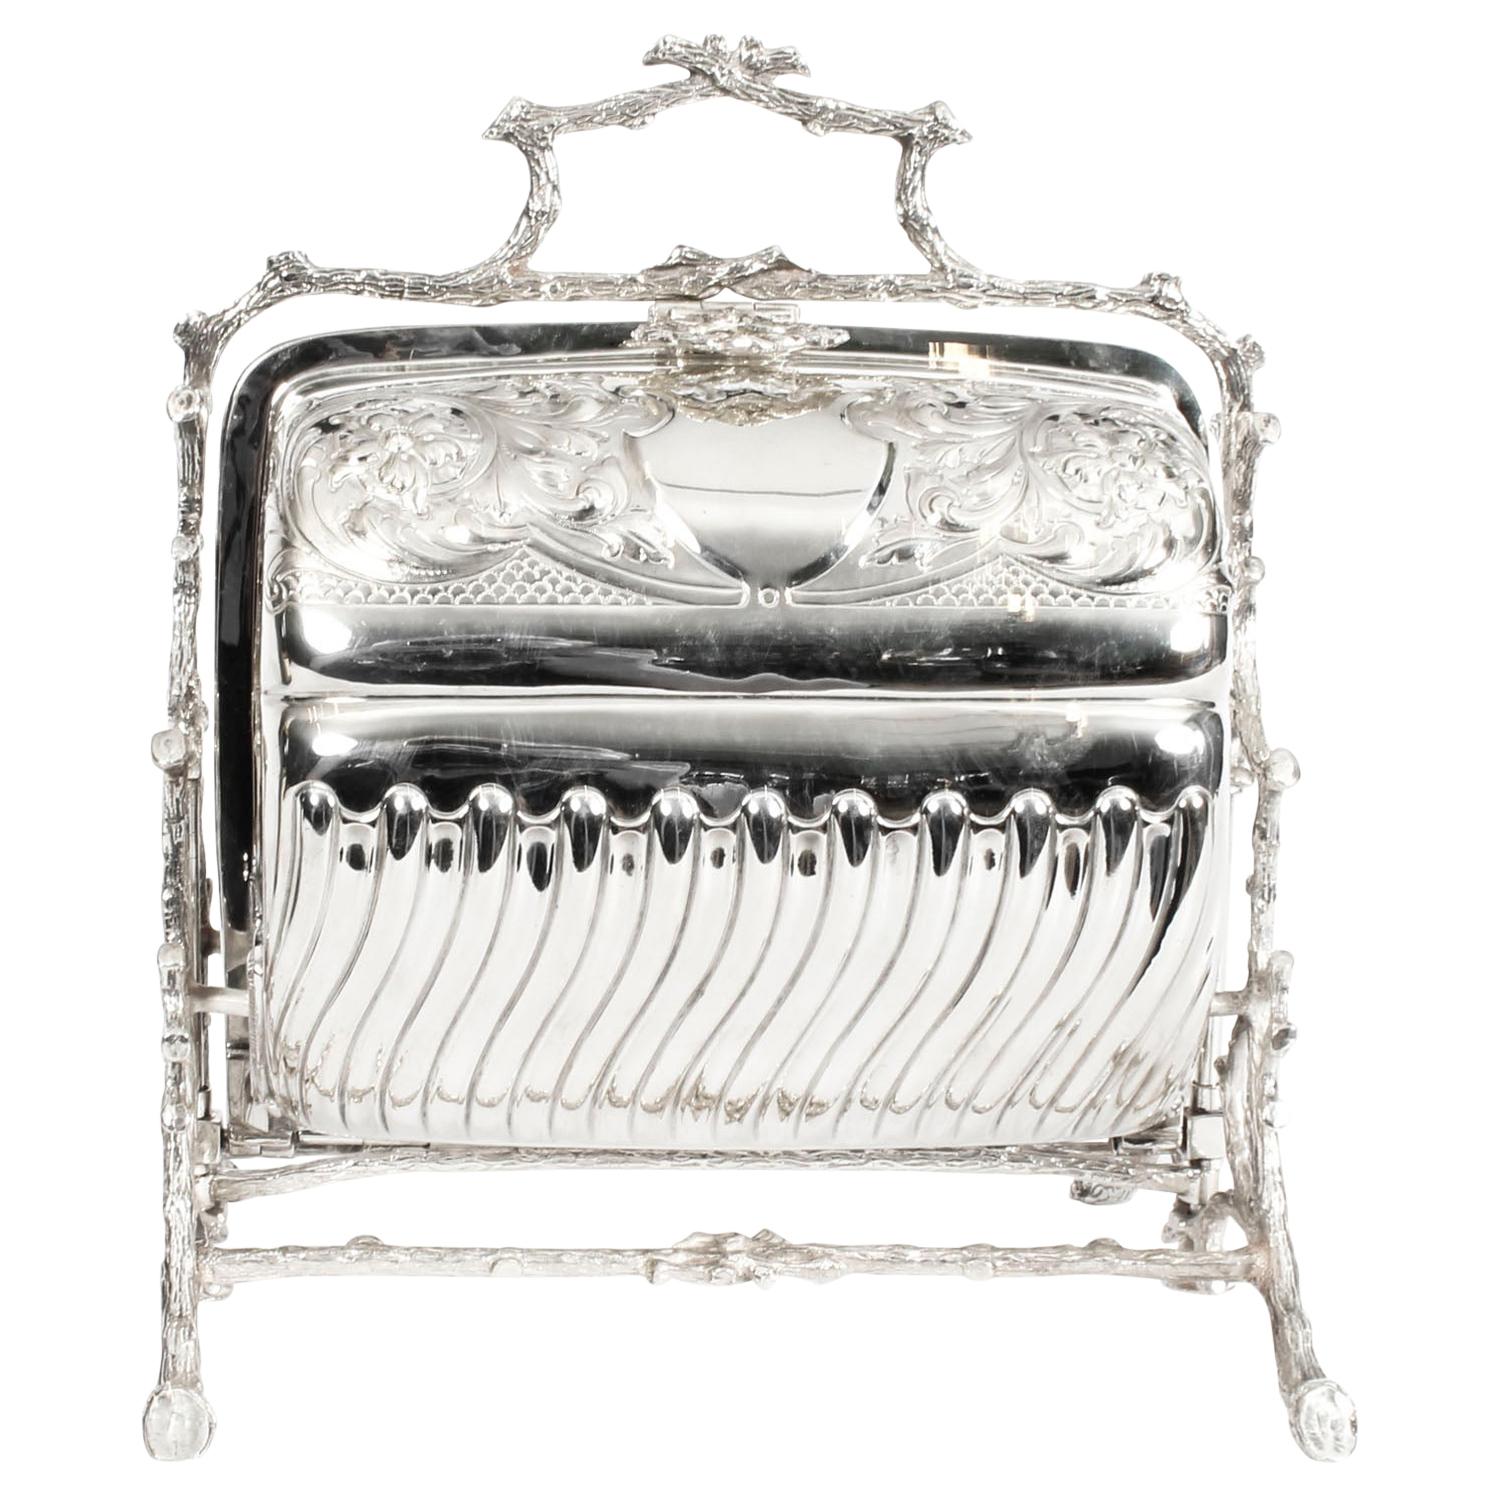 Antique English Silver Plated Sweets Biscuit Box Mappin & Webb, 19th Century